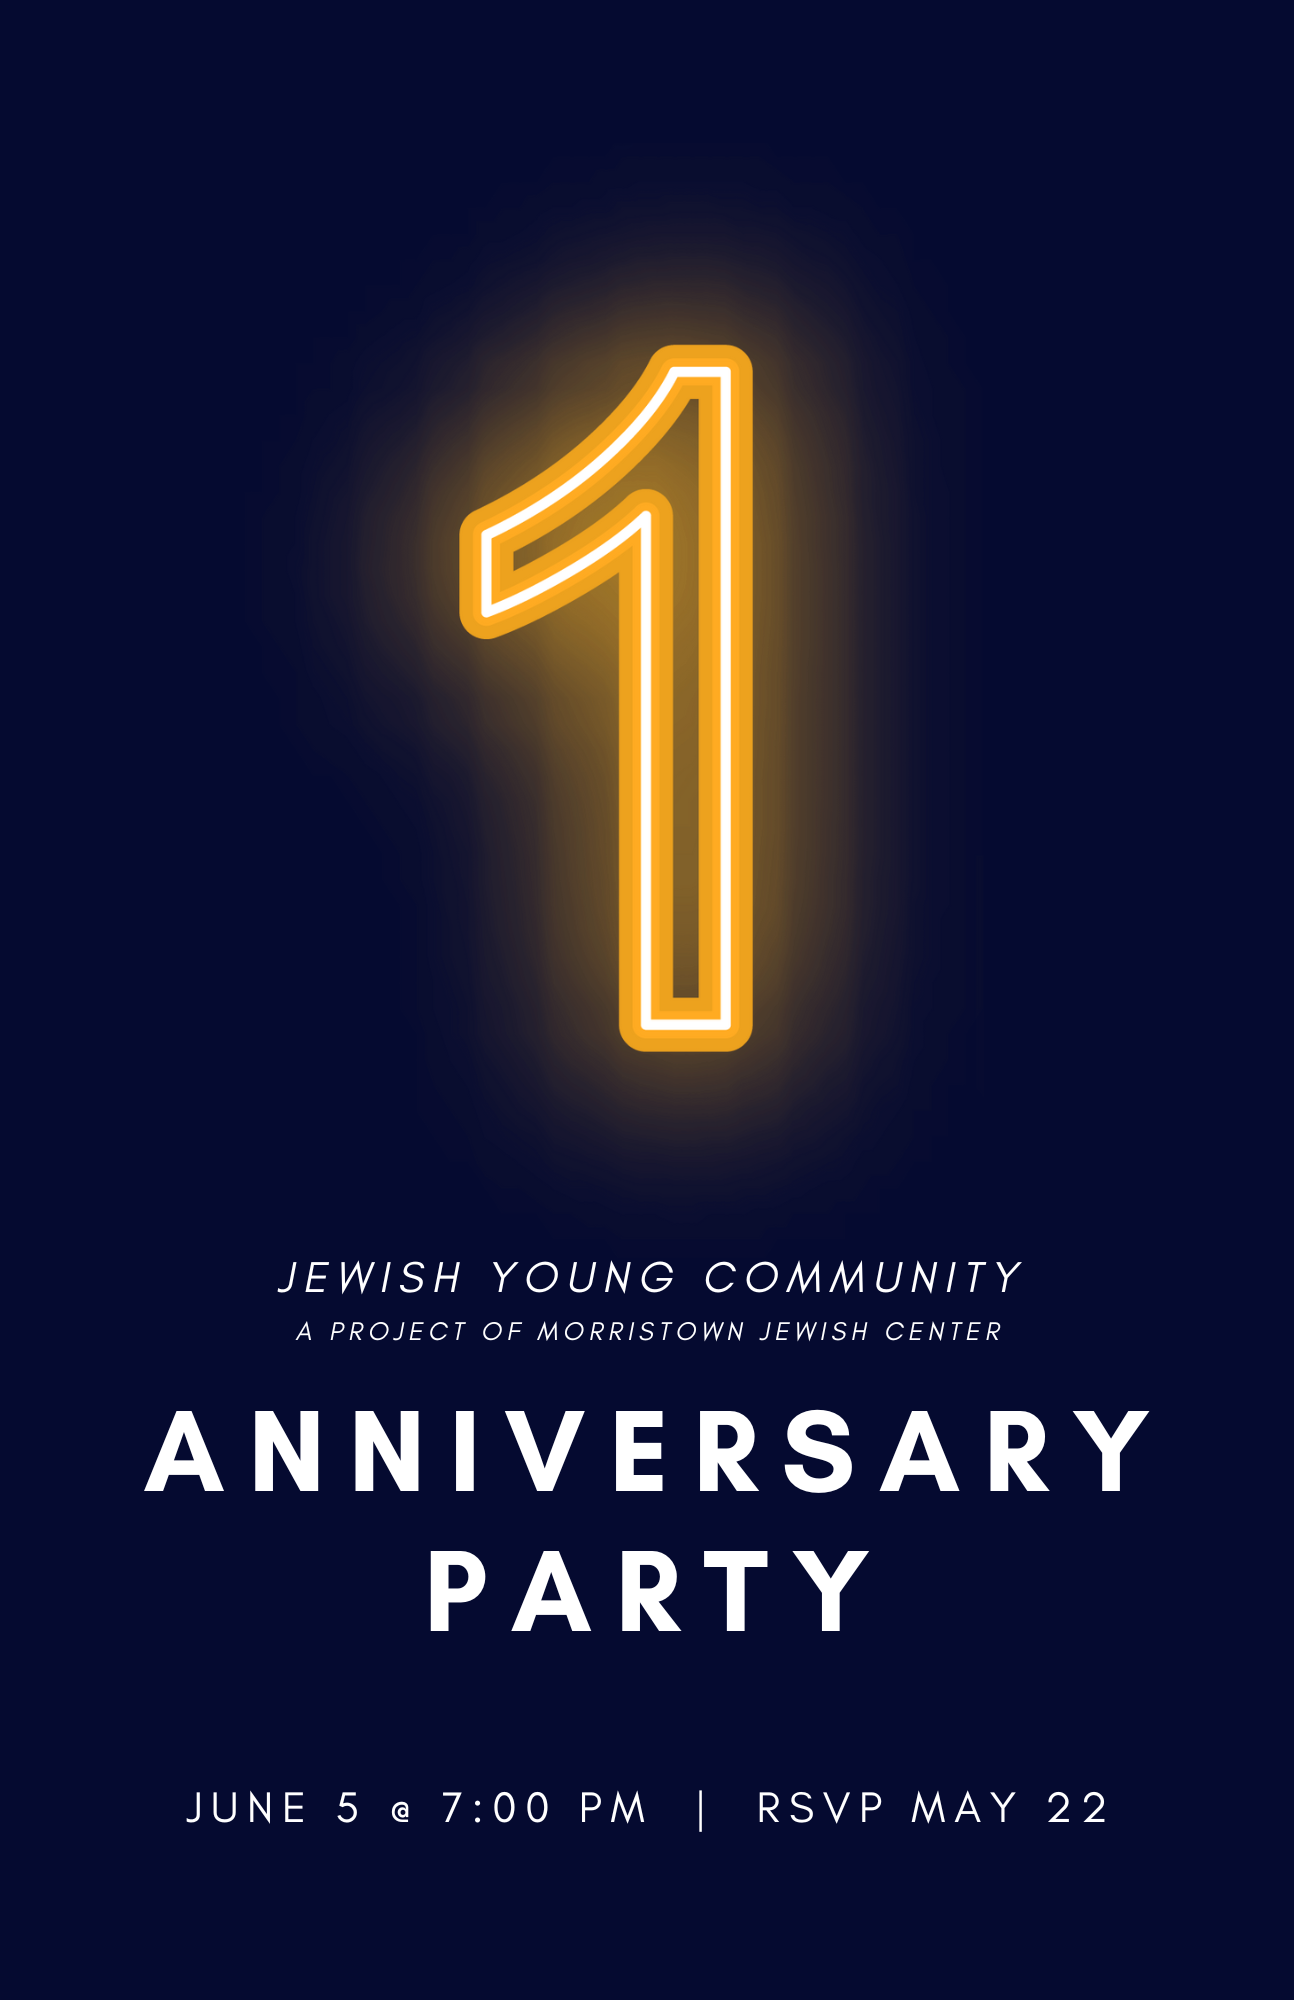 One Year Anniversary Party for JYC